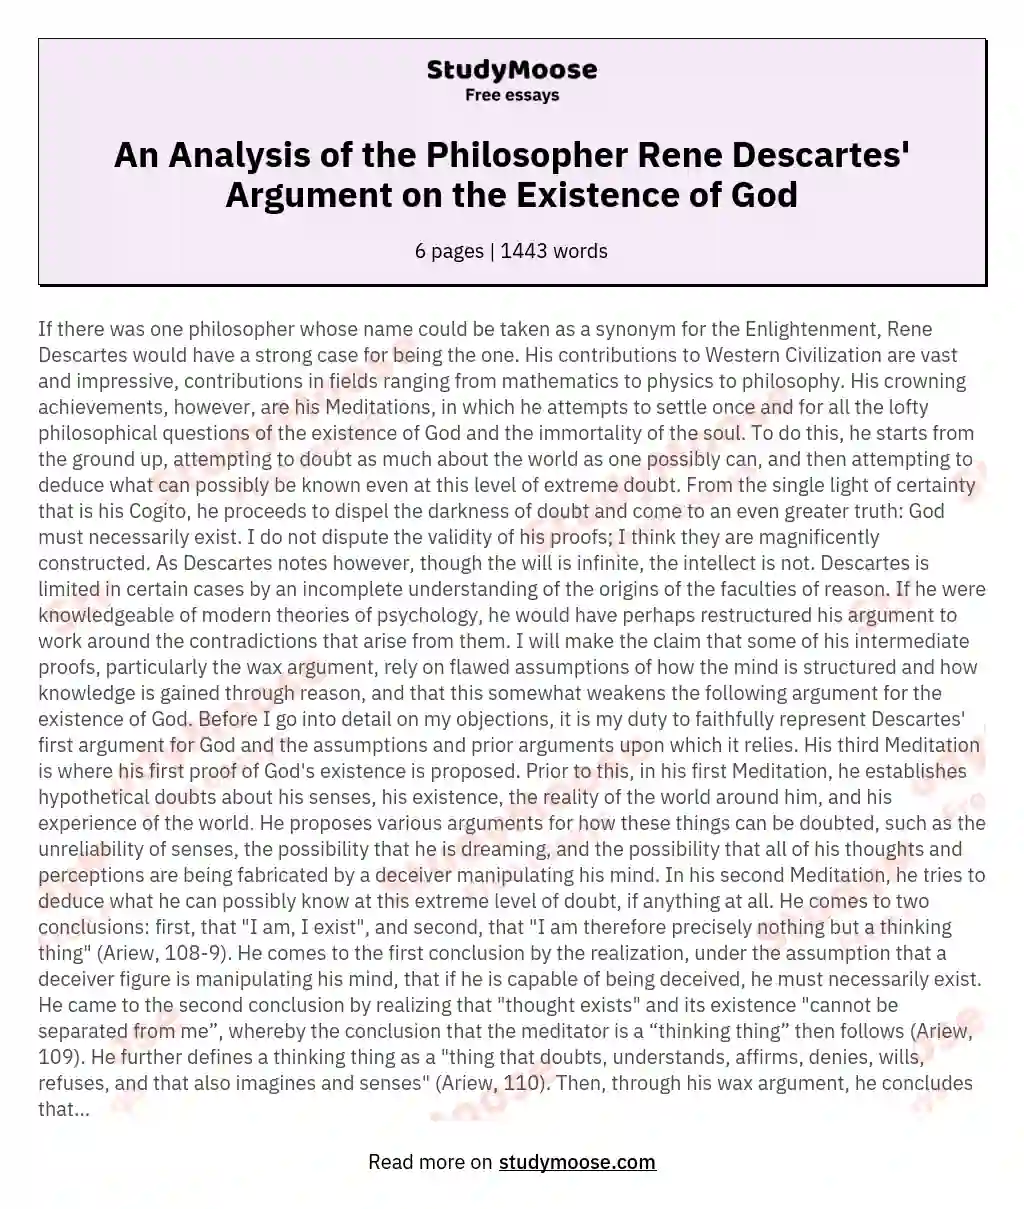 An Analysis of the Philosopher Rene Descartes' Argument on the Existence of God